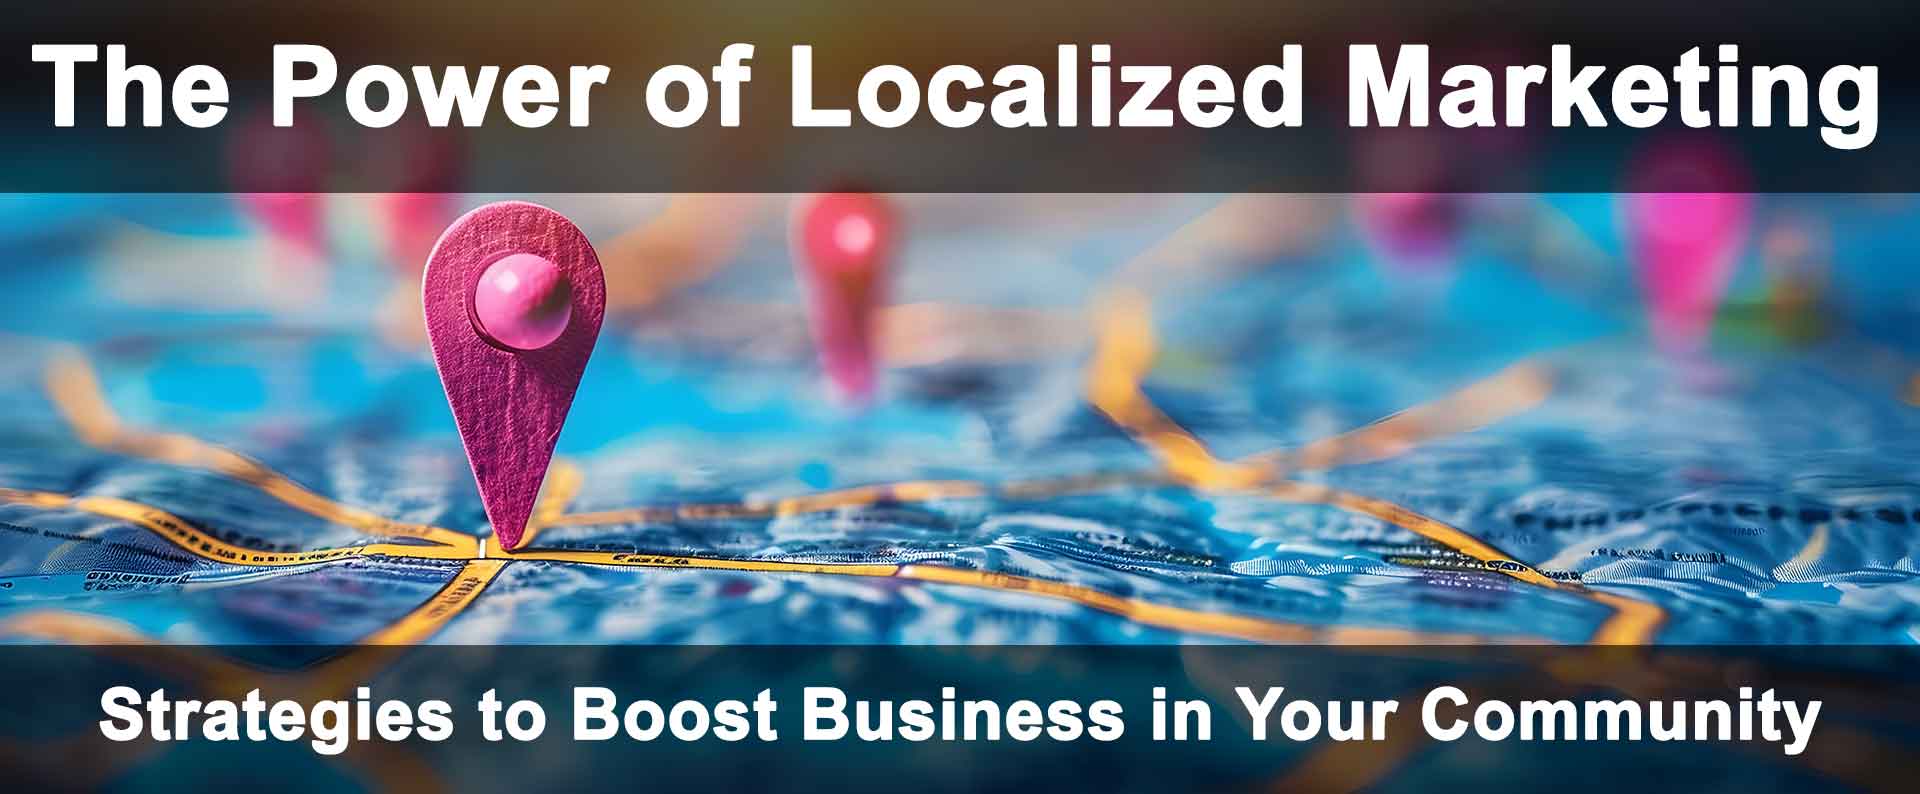 The Power of Localized Marketing